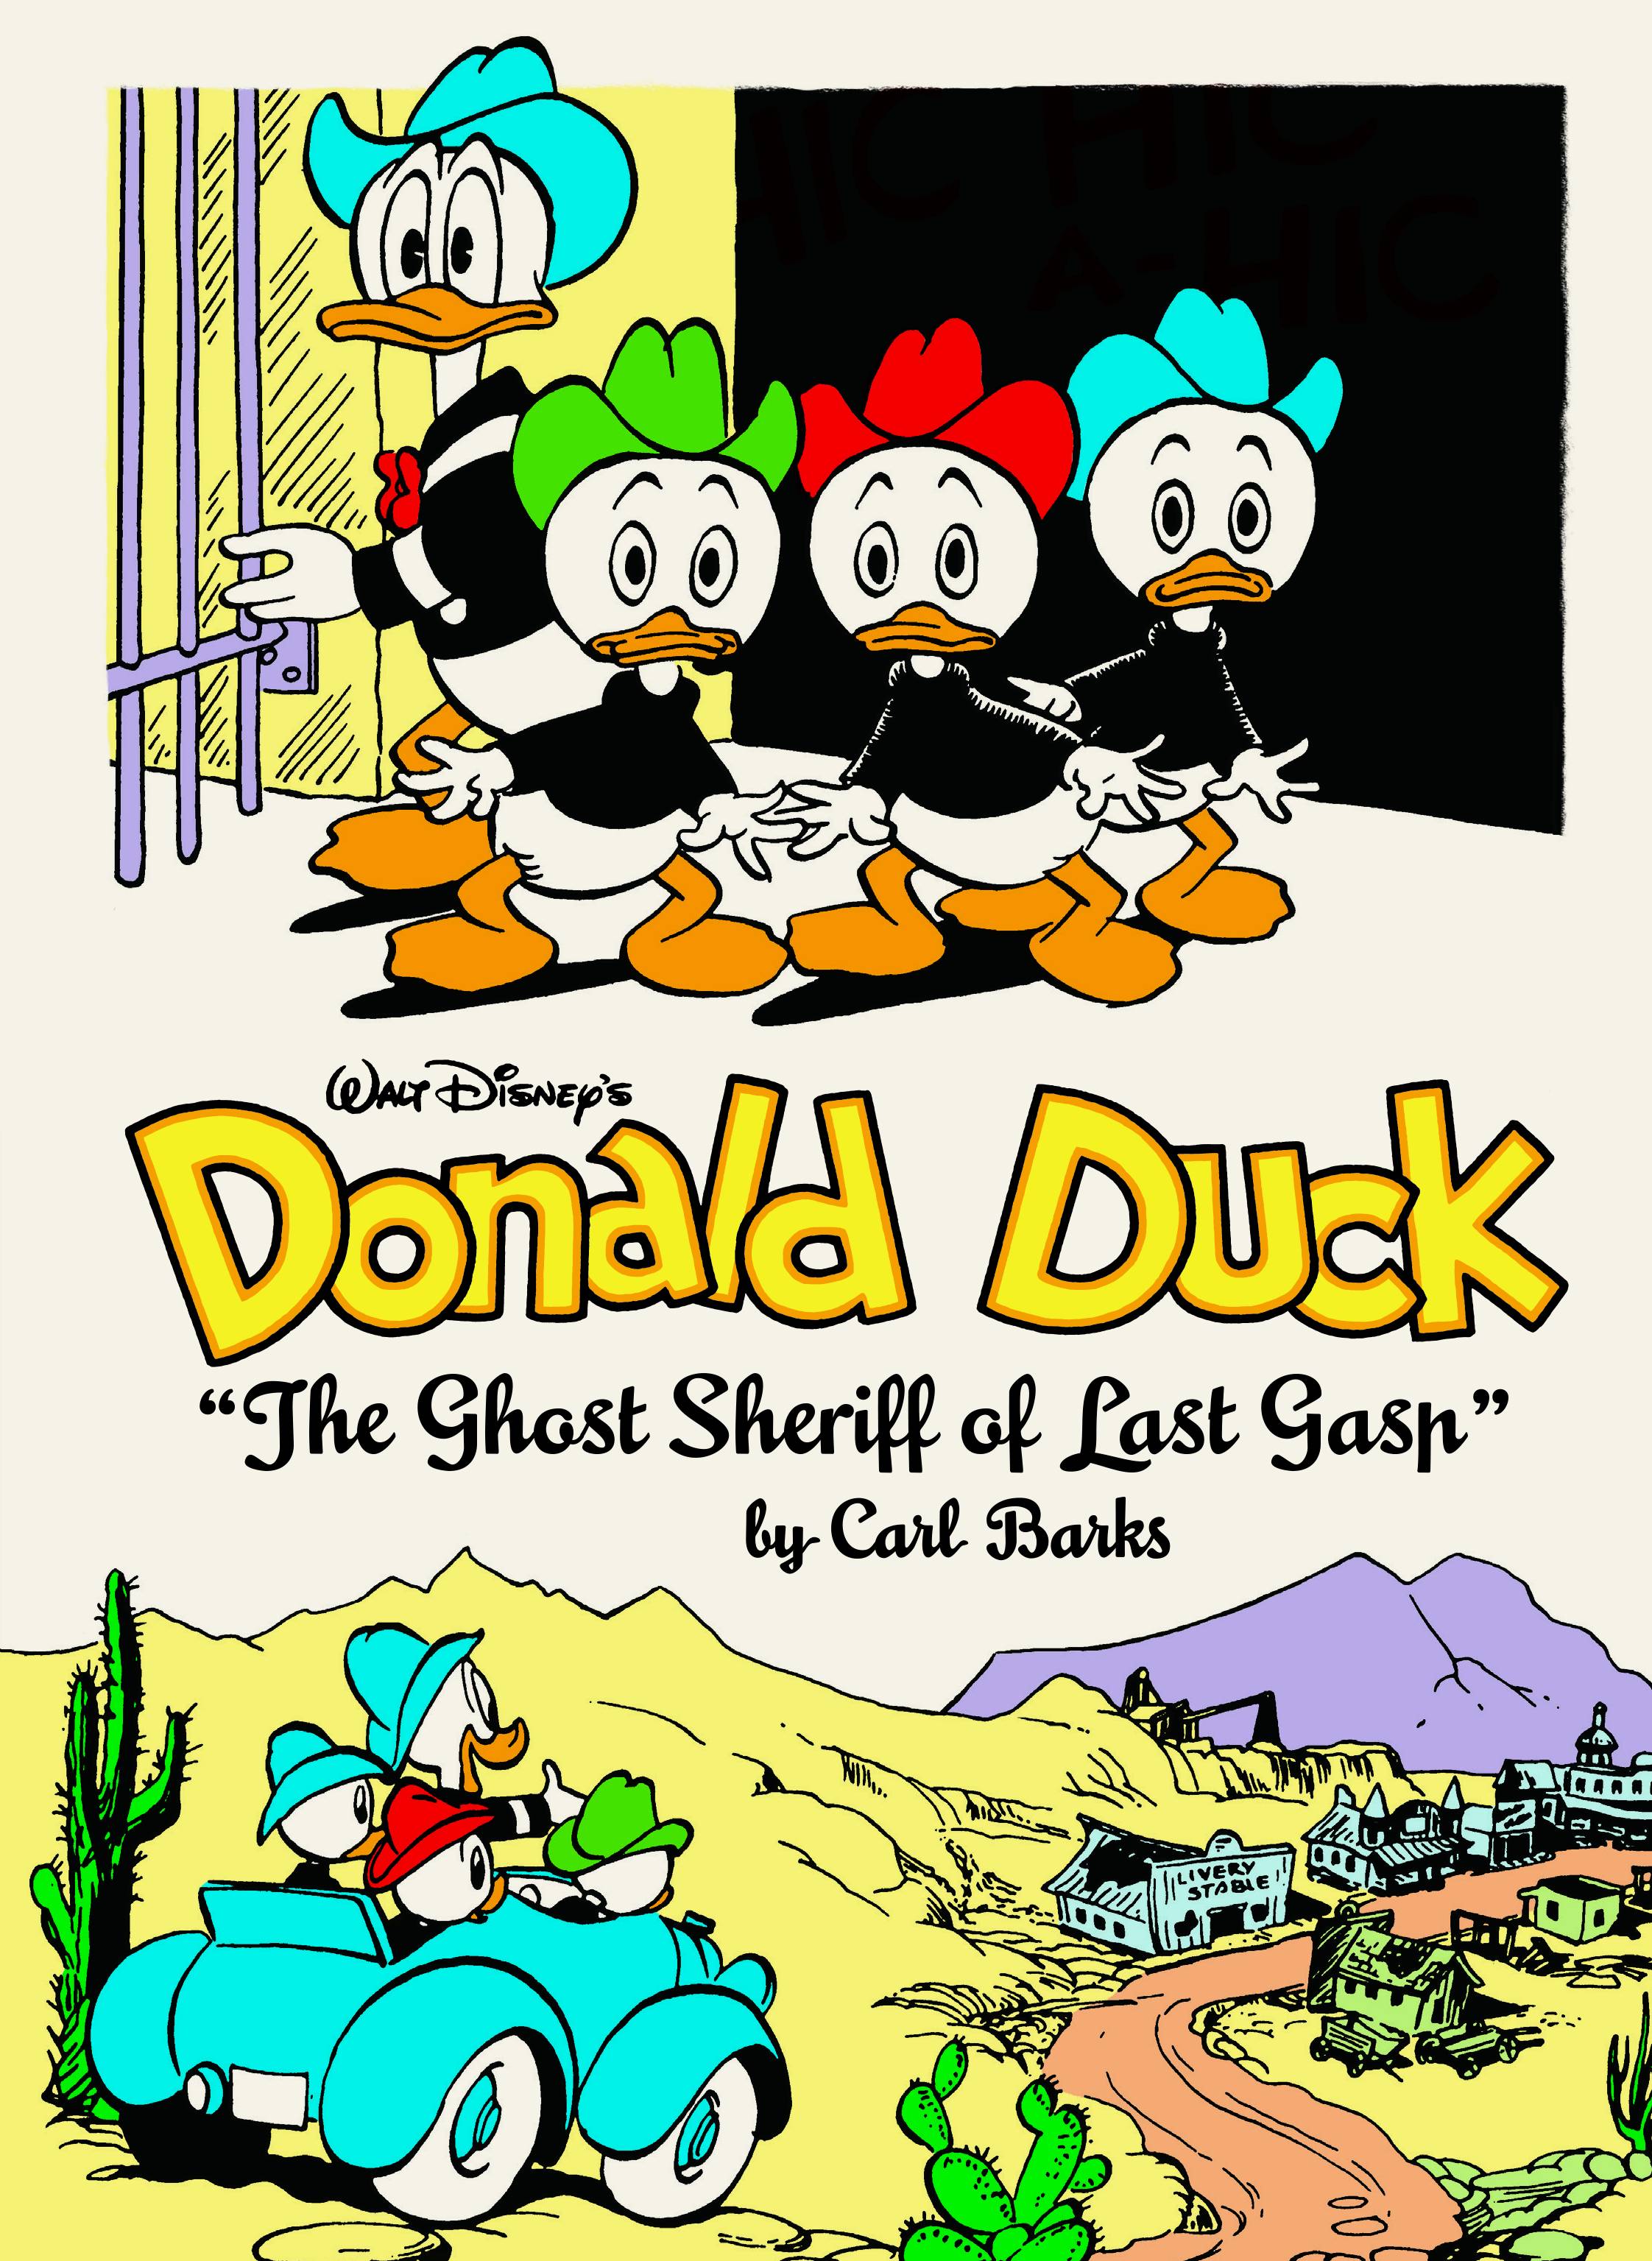 Complete Carl Barks Disney Library Hardcover Volume 15 Walt Disney's Donald Duck The Ghost Sheriff of Last Gasp